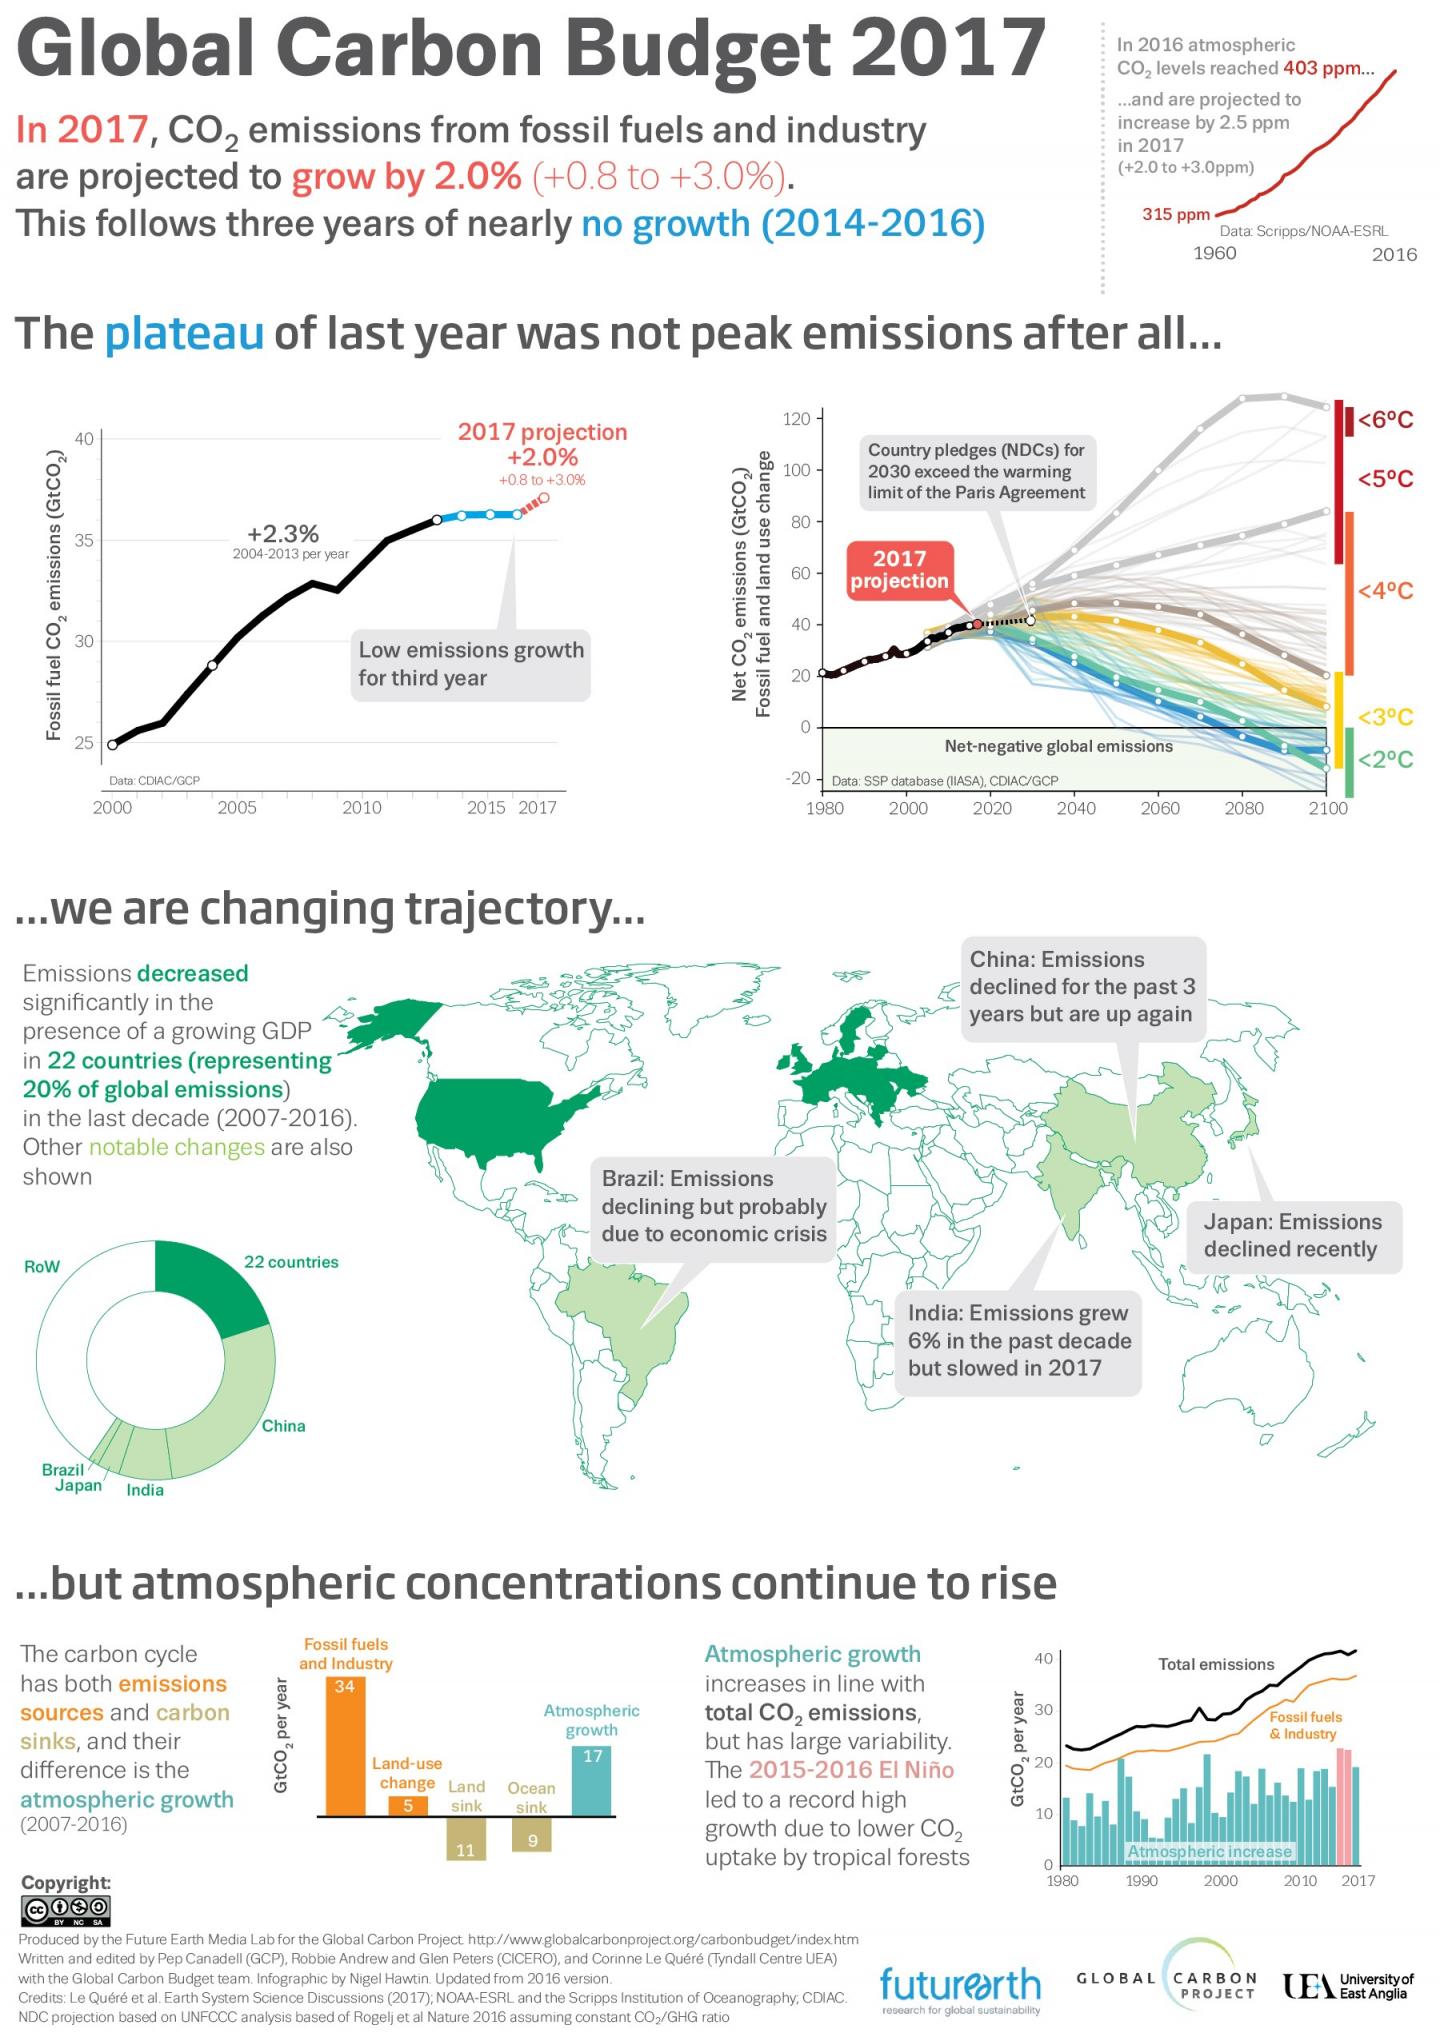 Global Carbon Budget Infographic